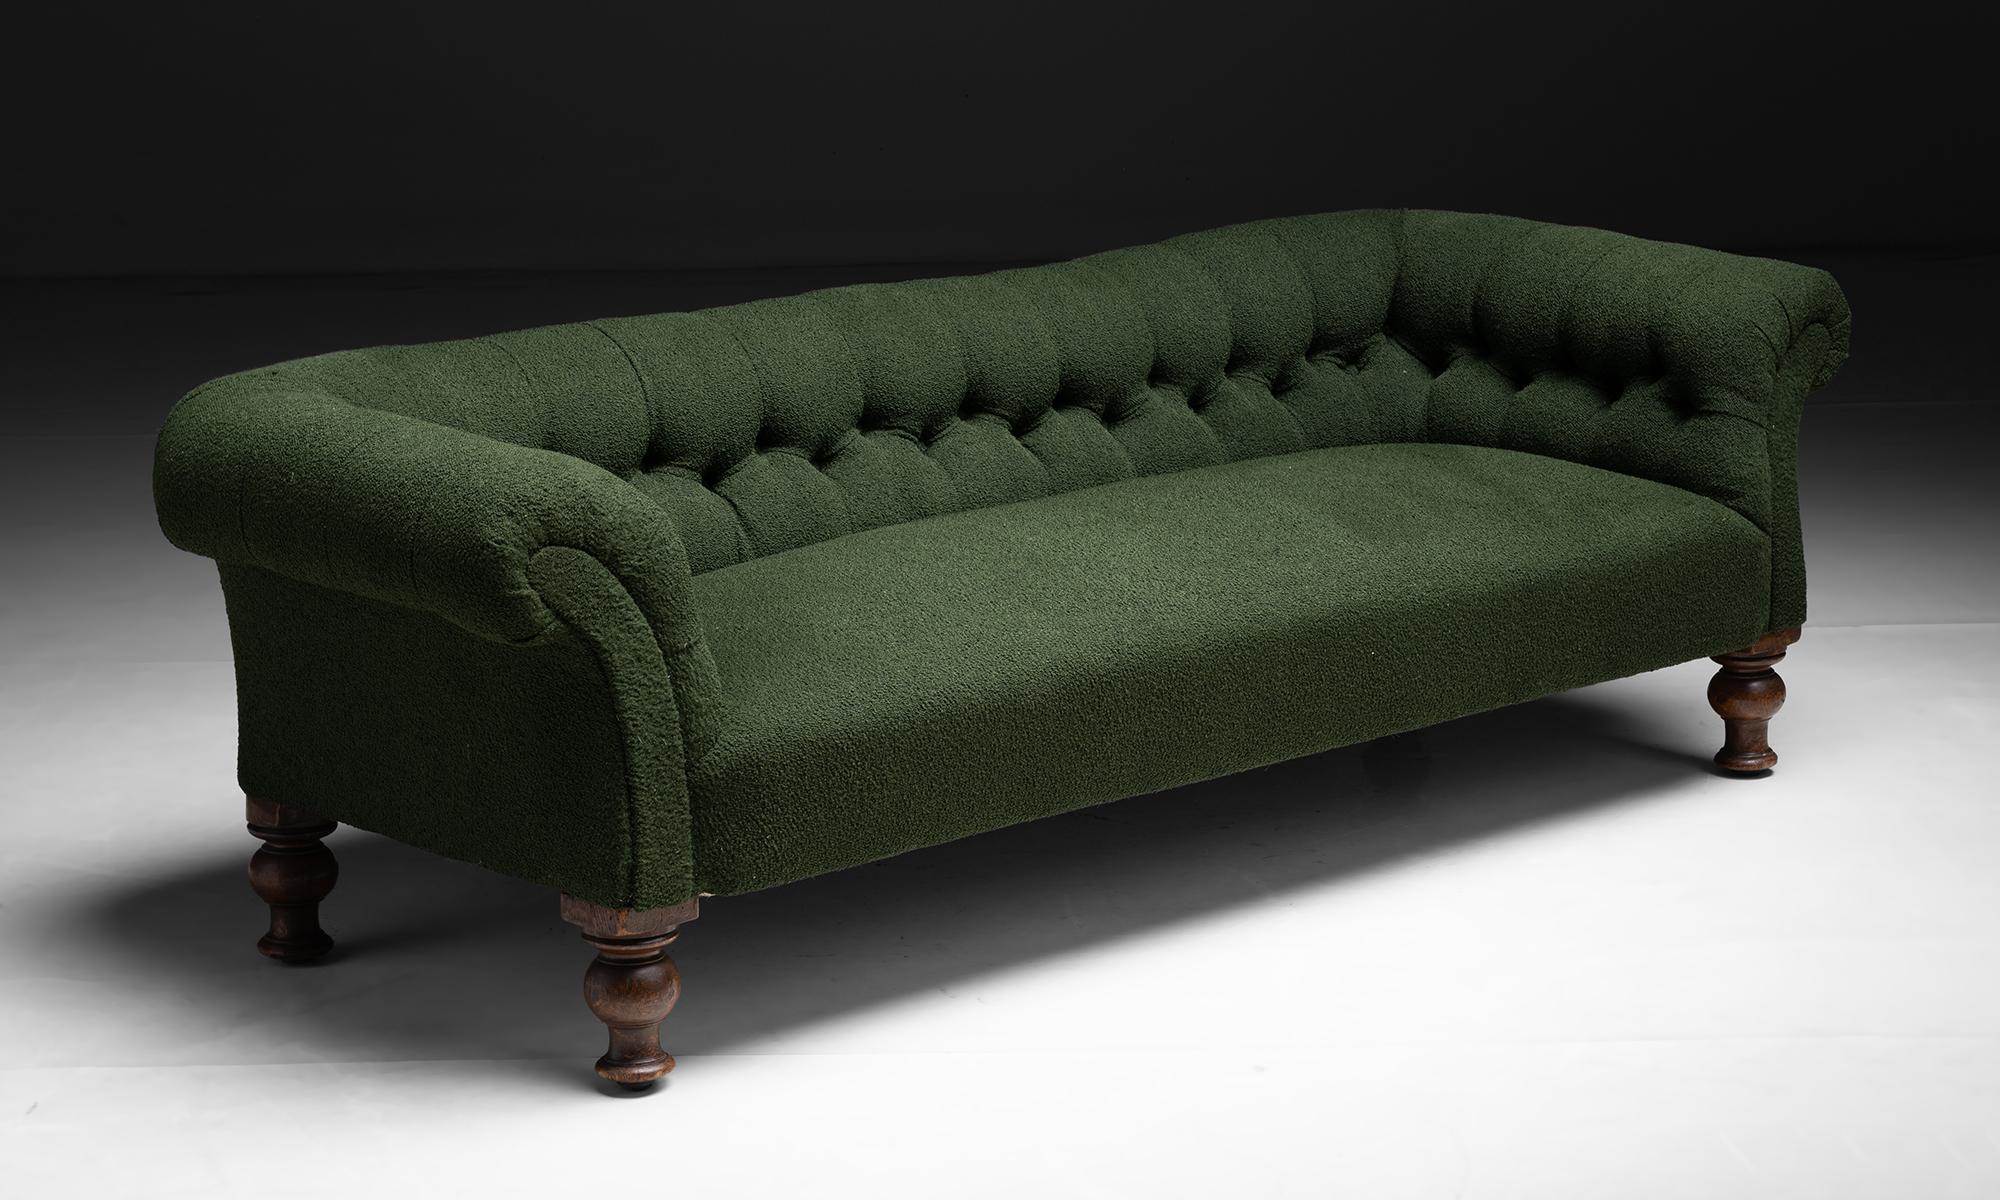 Victorian Chesterfield Sofa

England circa 1900

Newly upholstered in forest green boucle, on antique frame.

Measures 83”L x 35”d x 25”h